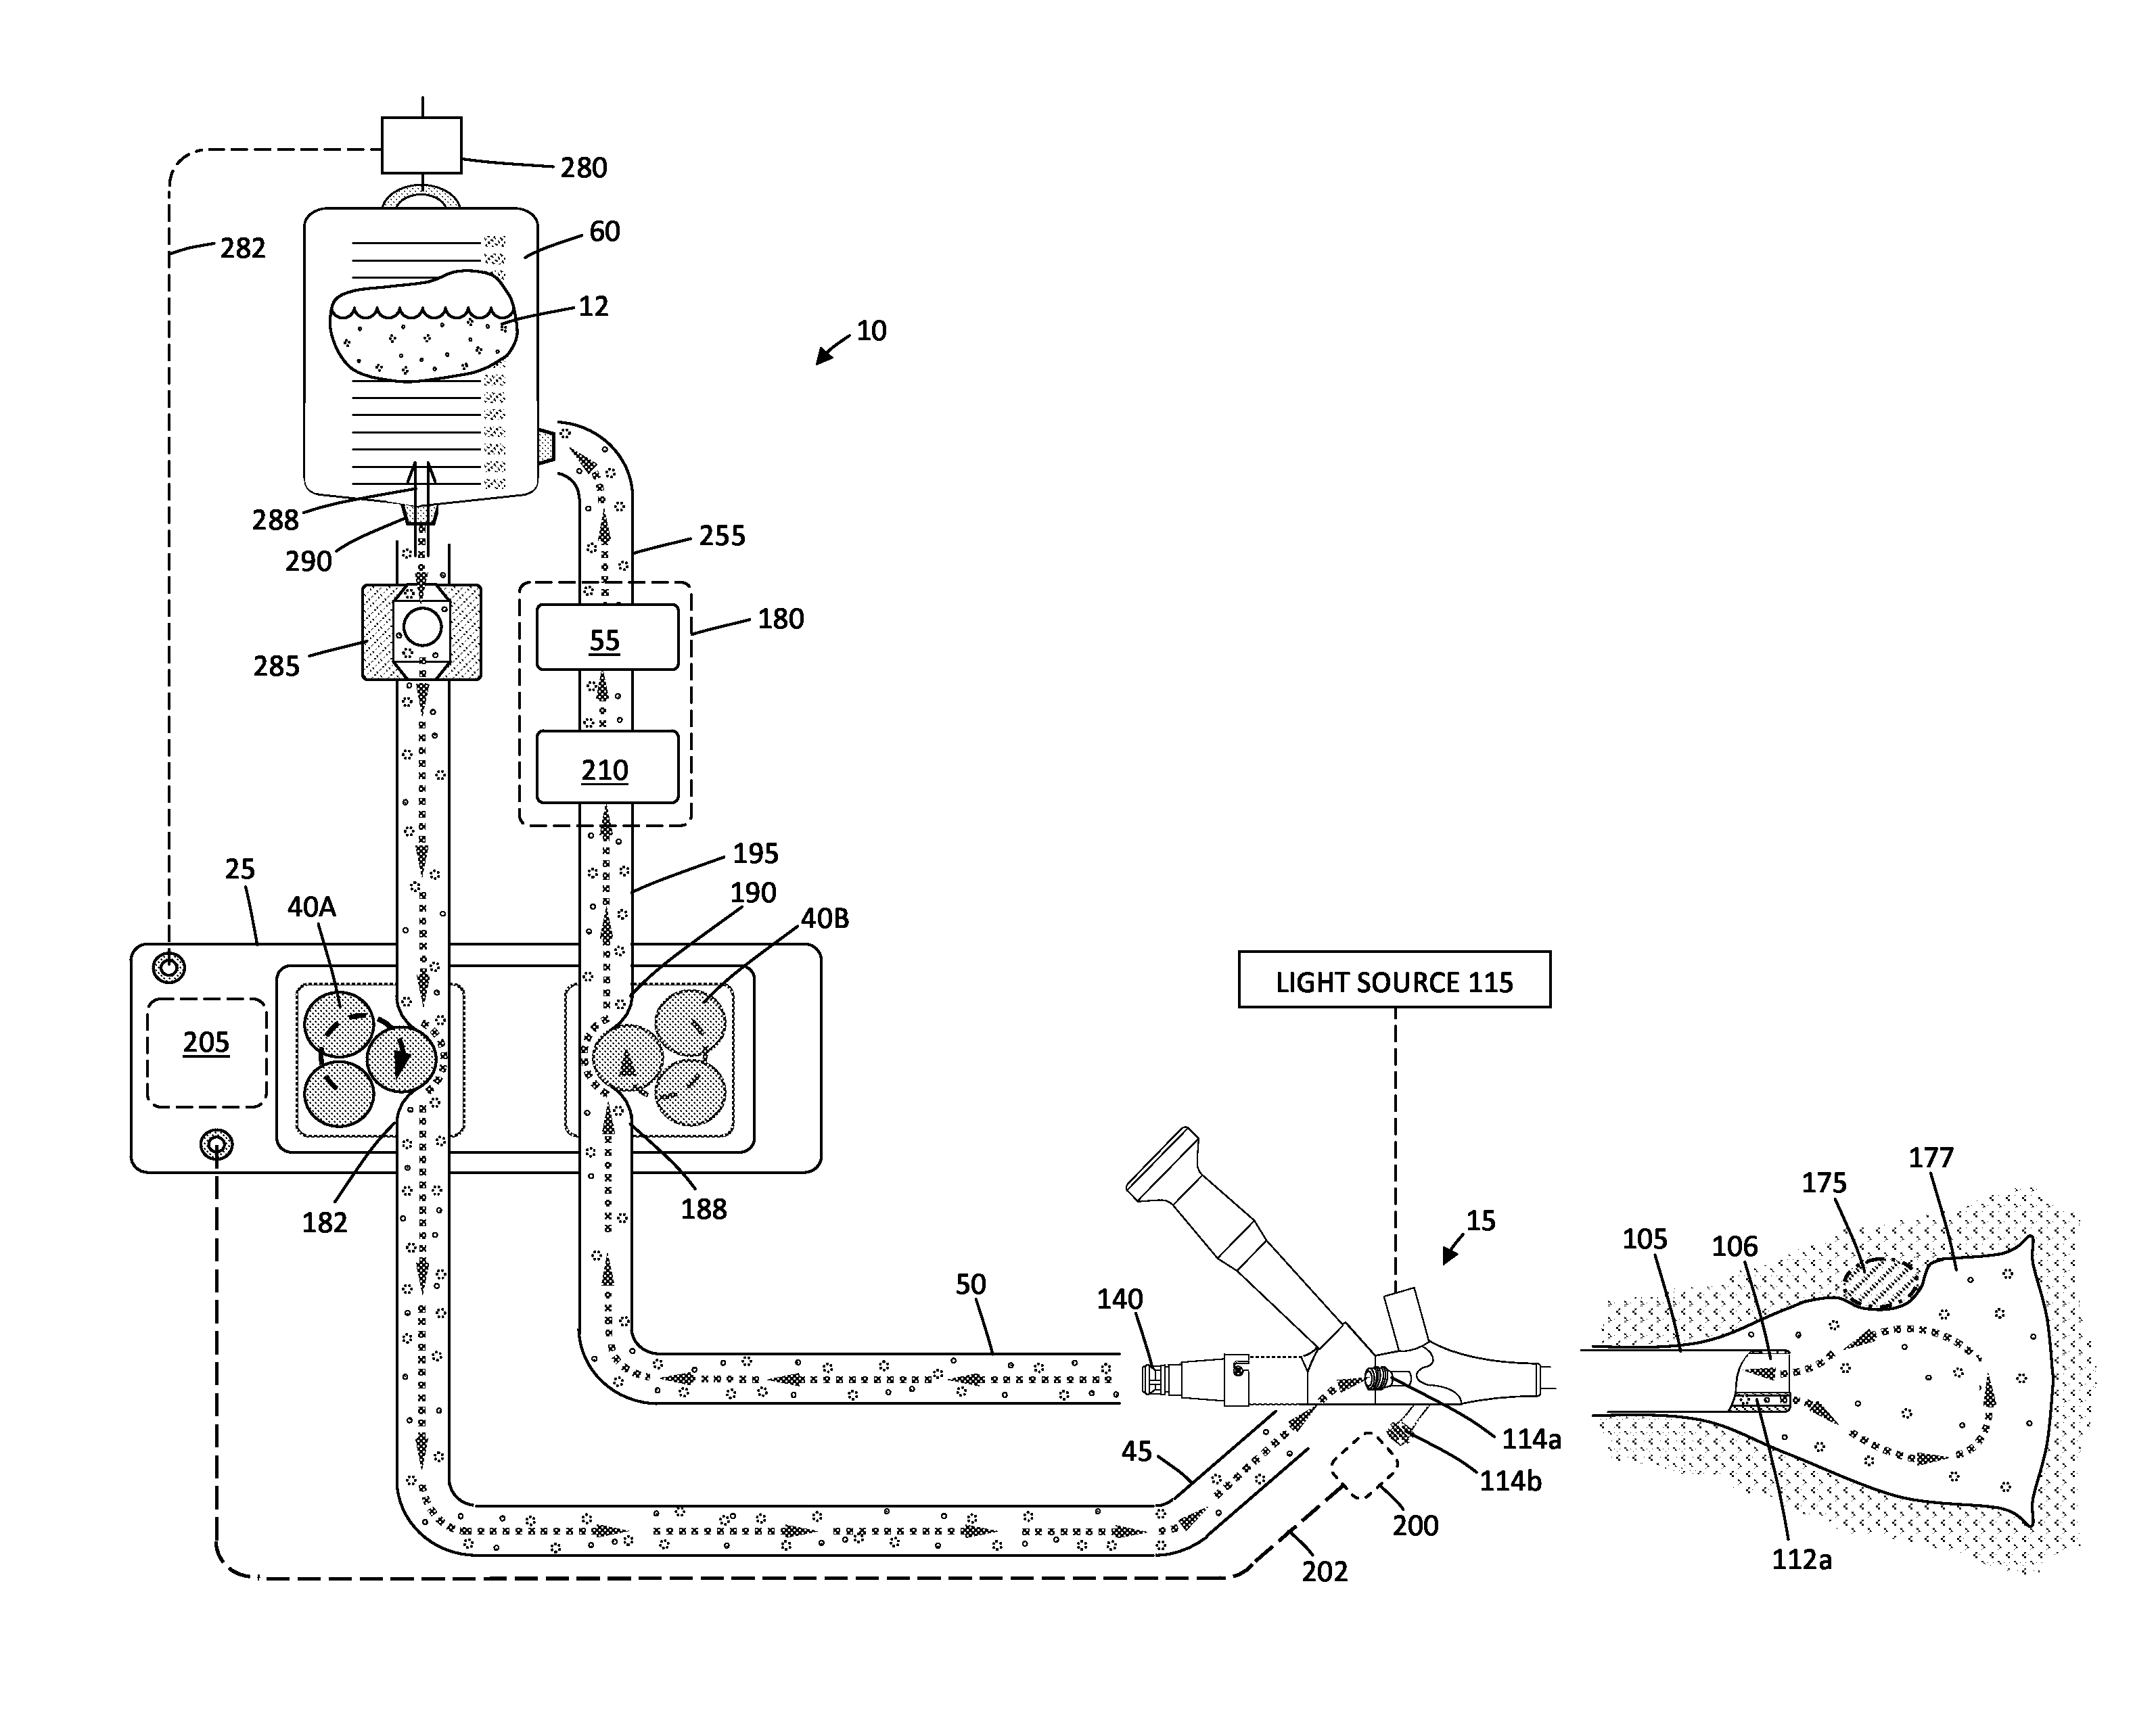 Fluid management system and methods